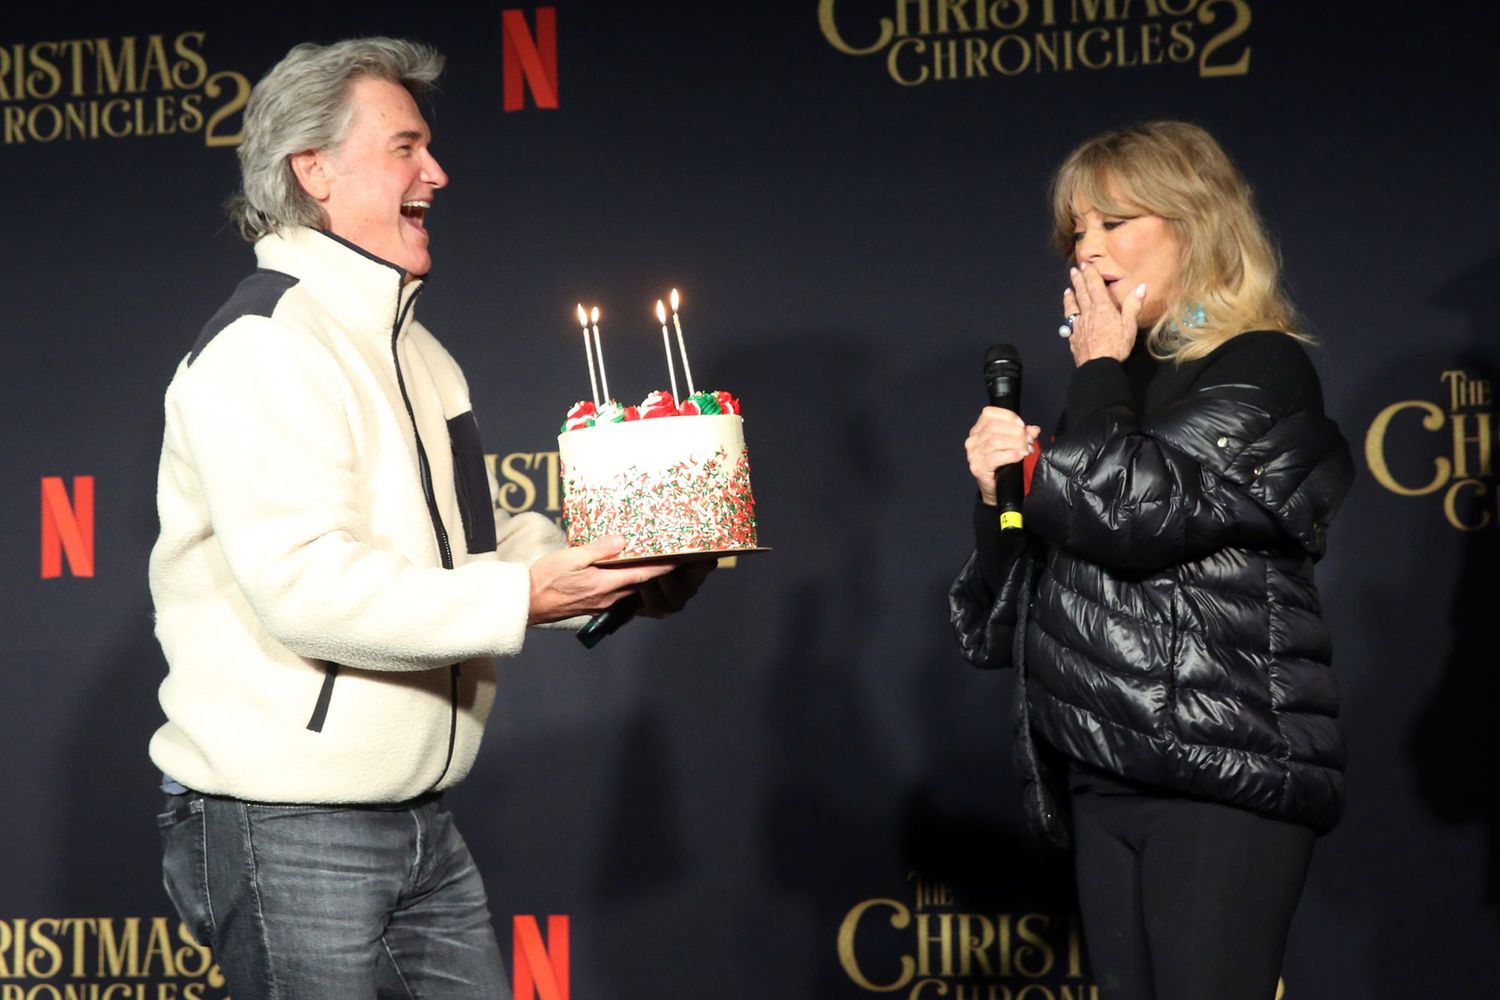 Kurt Russell (L) presents Goldie Hawn with a cake for her milestone birthday at Netflix's "The Christmas Chronicles: Part Two" Drive-In Event at The Grove